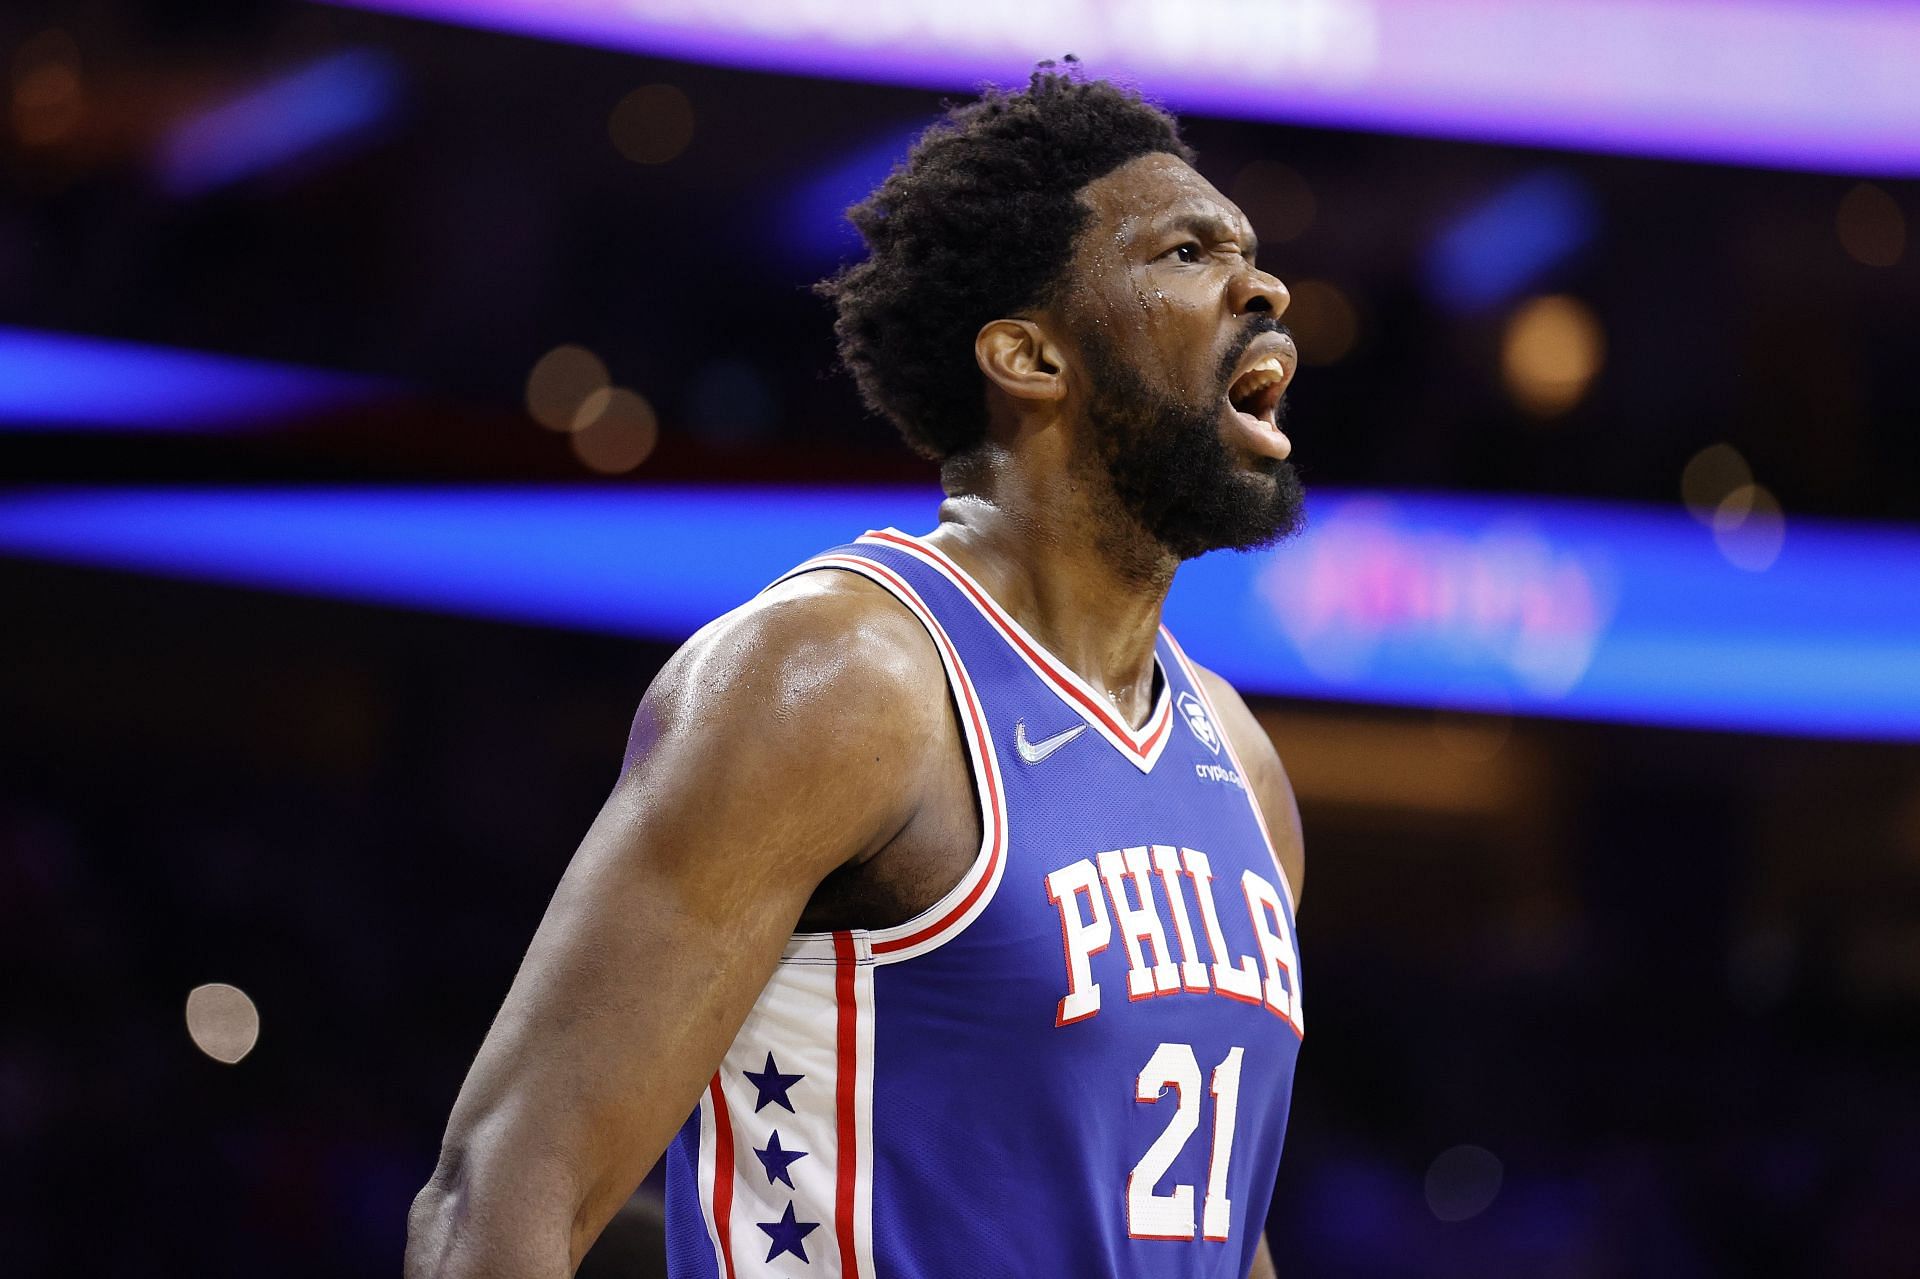 Joel Embiid of the 76ers reacts after scoring against the Toronto Raptors